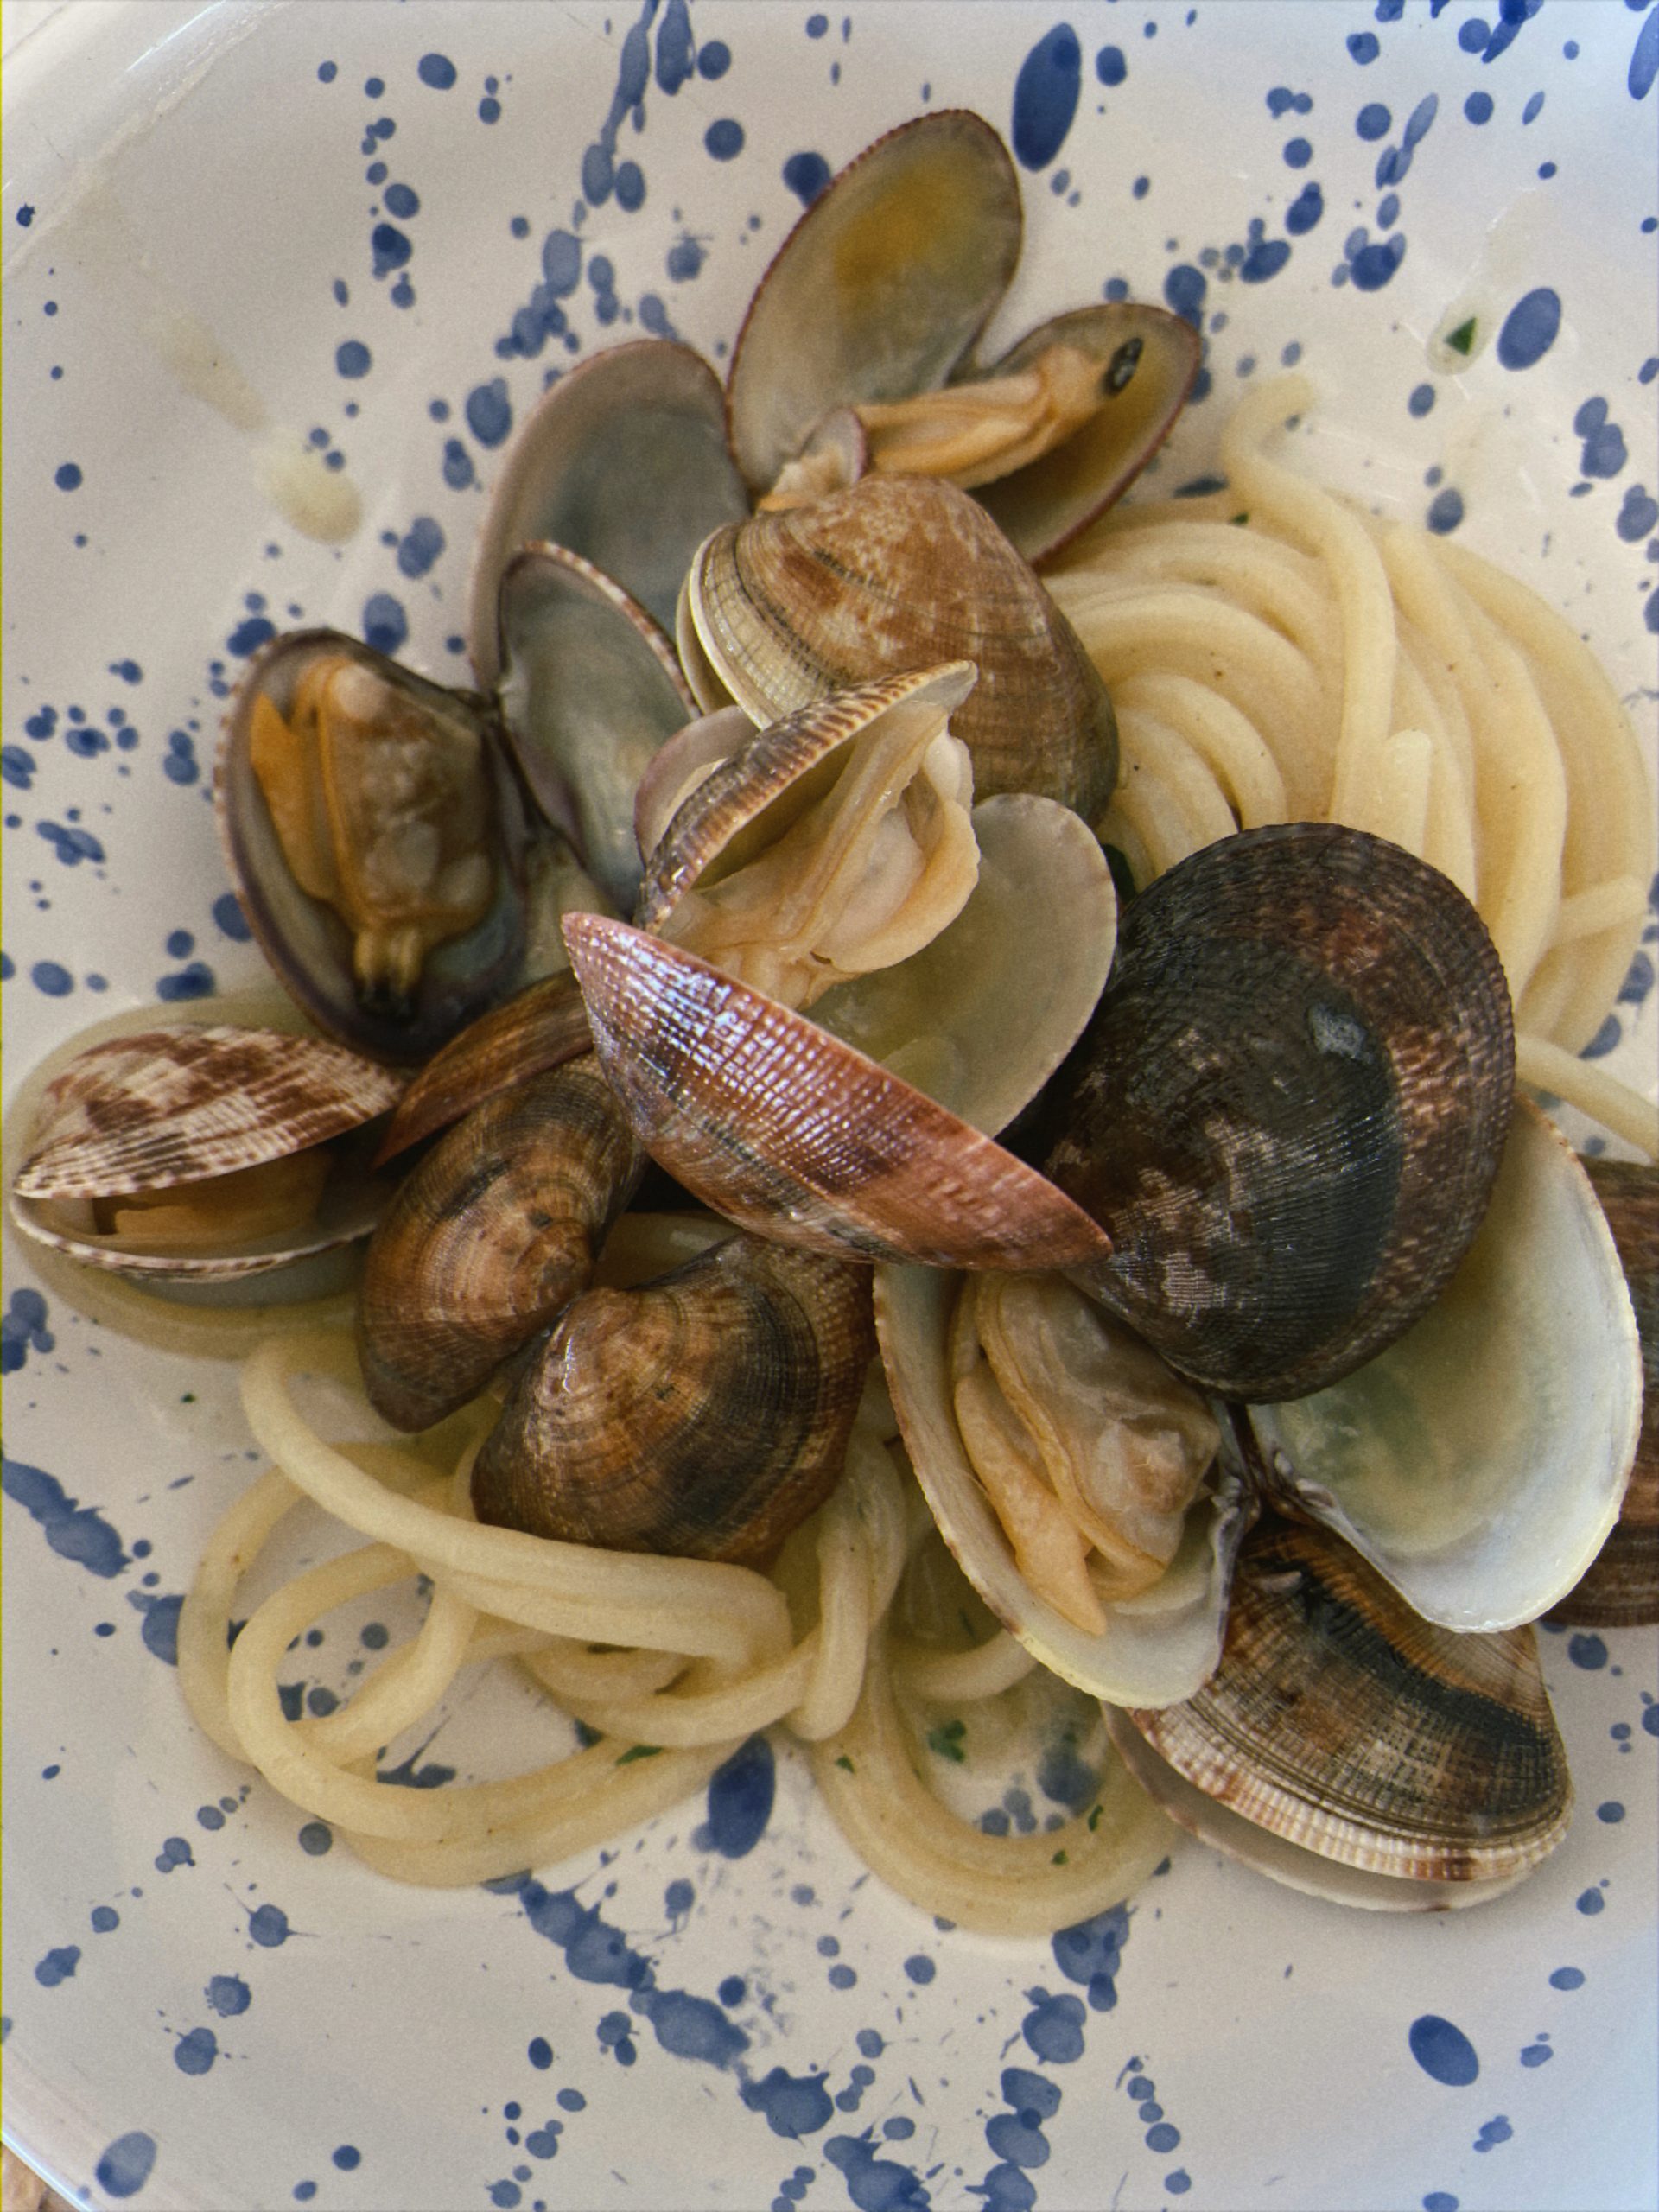 Pasta with clams